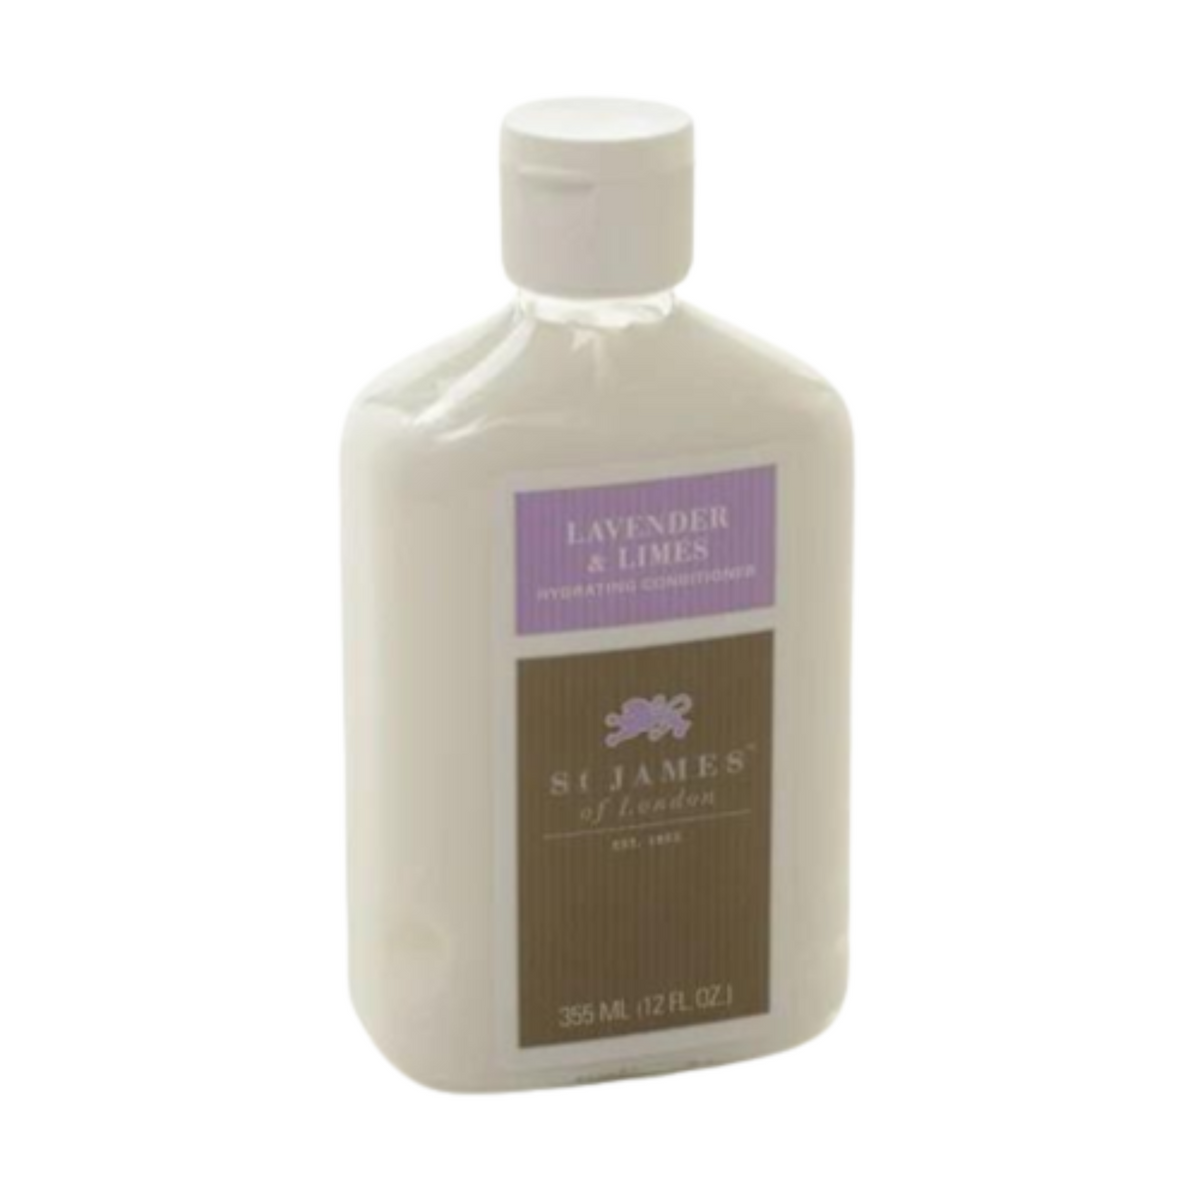 Primary Image of Lavender & Limes Conditioner